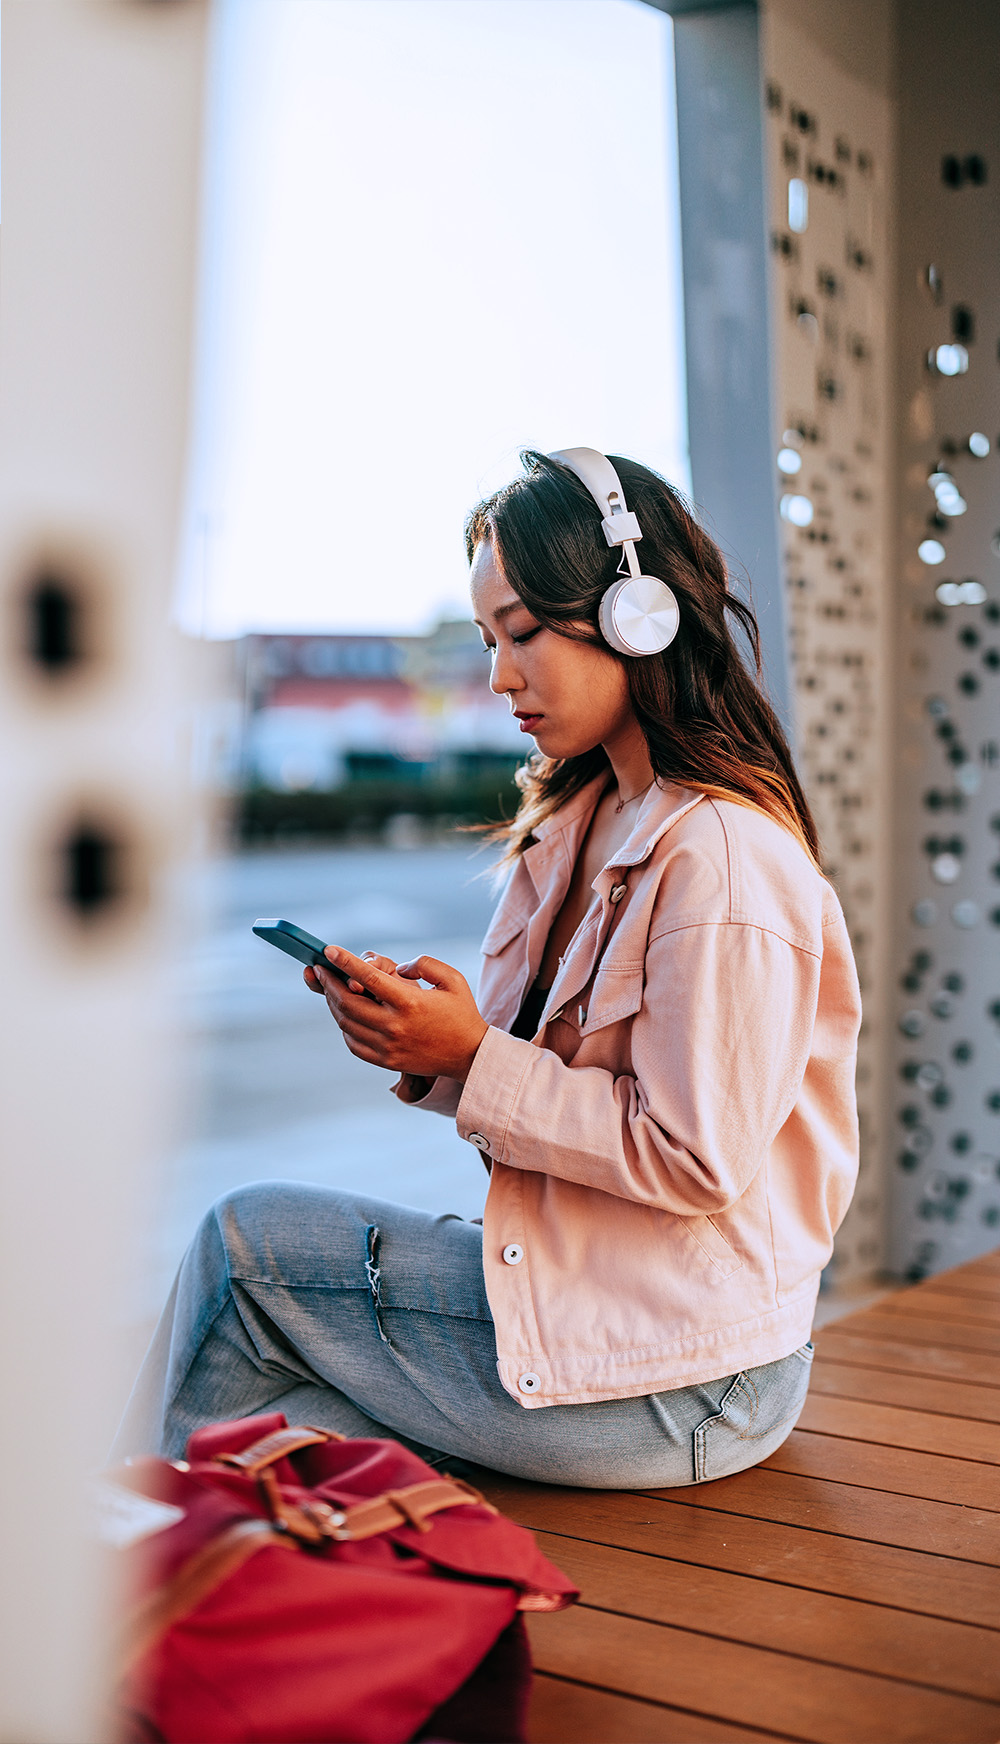 Young woman in public listening to music on a smartphone